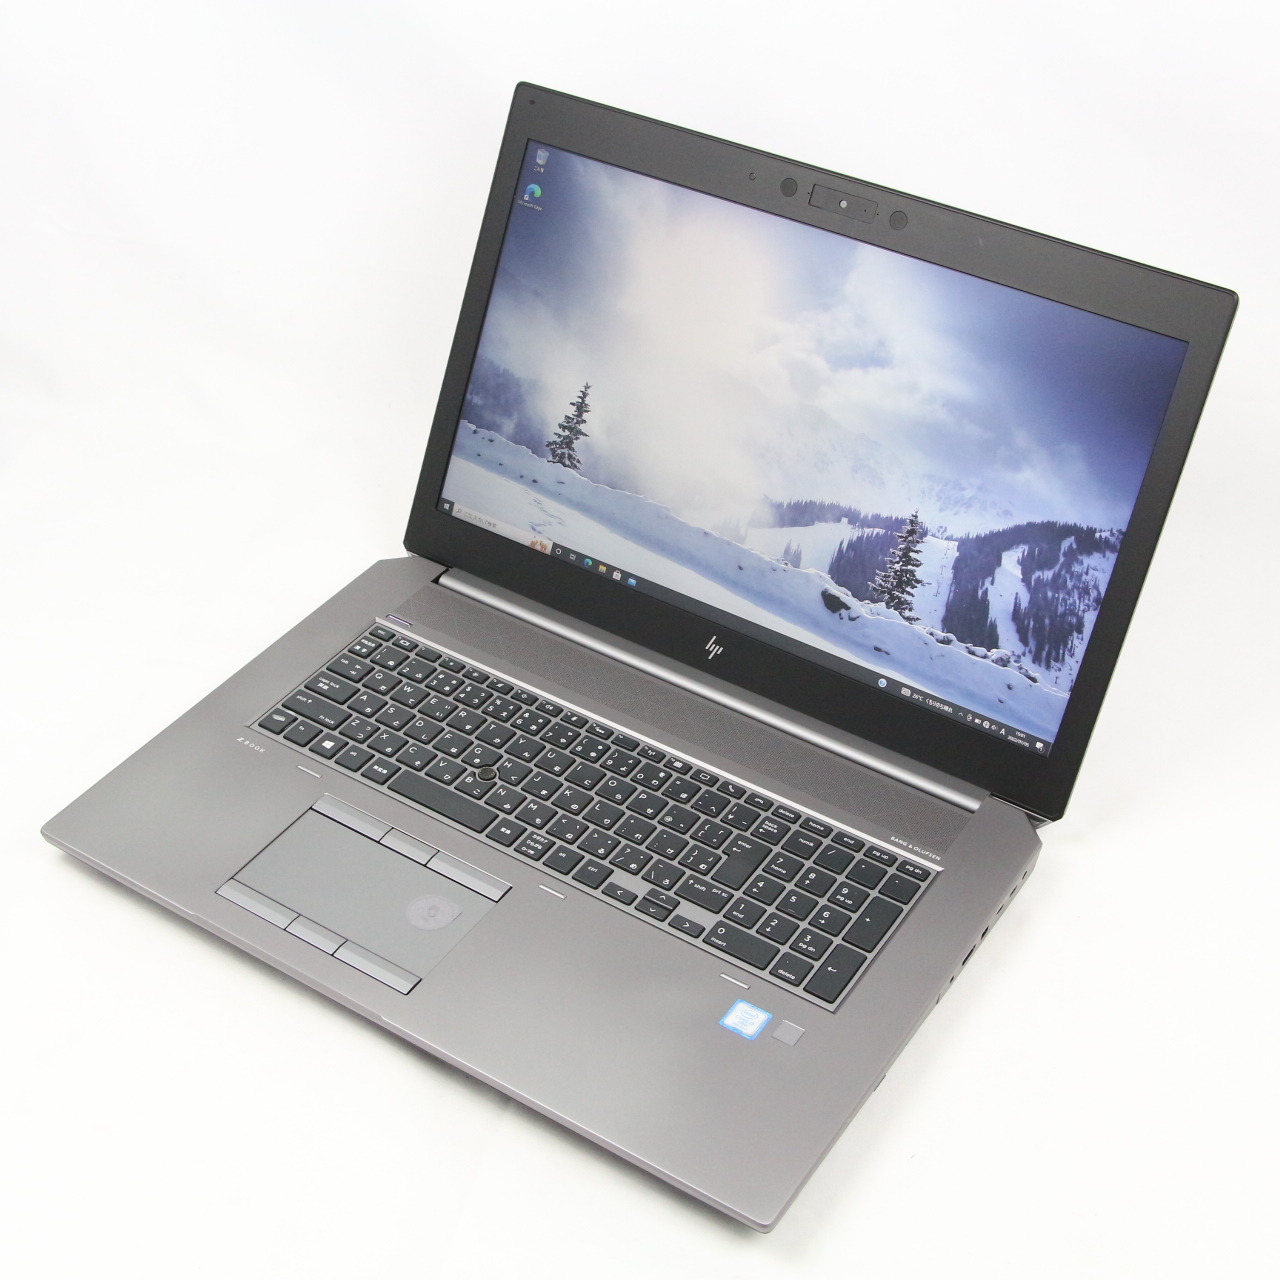 ZBook 17 G6 Mobile Workstation / 17.3インチ / 6C Core i7-9850H / 2.6GHz / 32GB / SSD 512GB + HDD 1TB